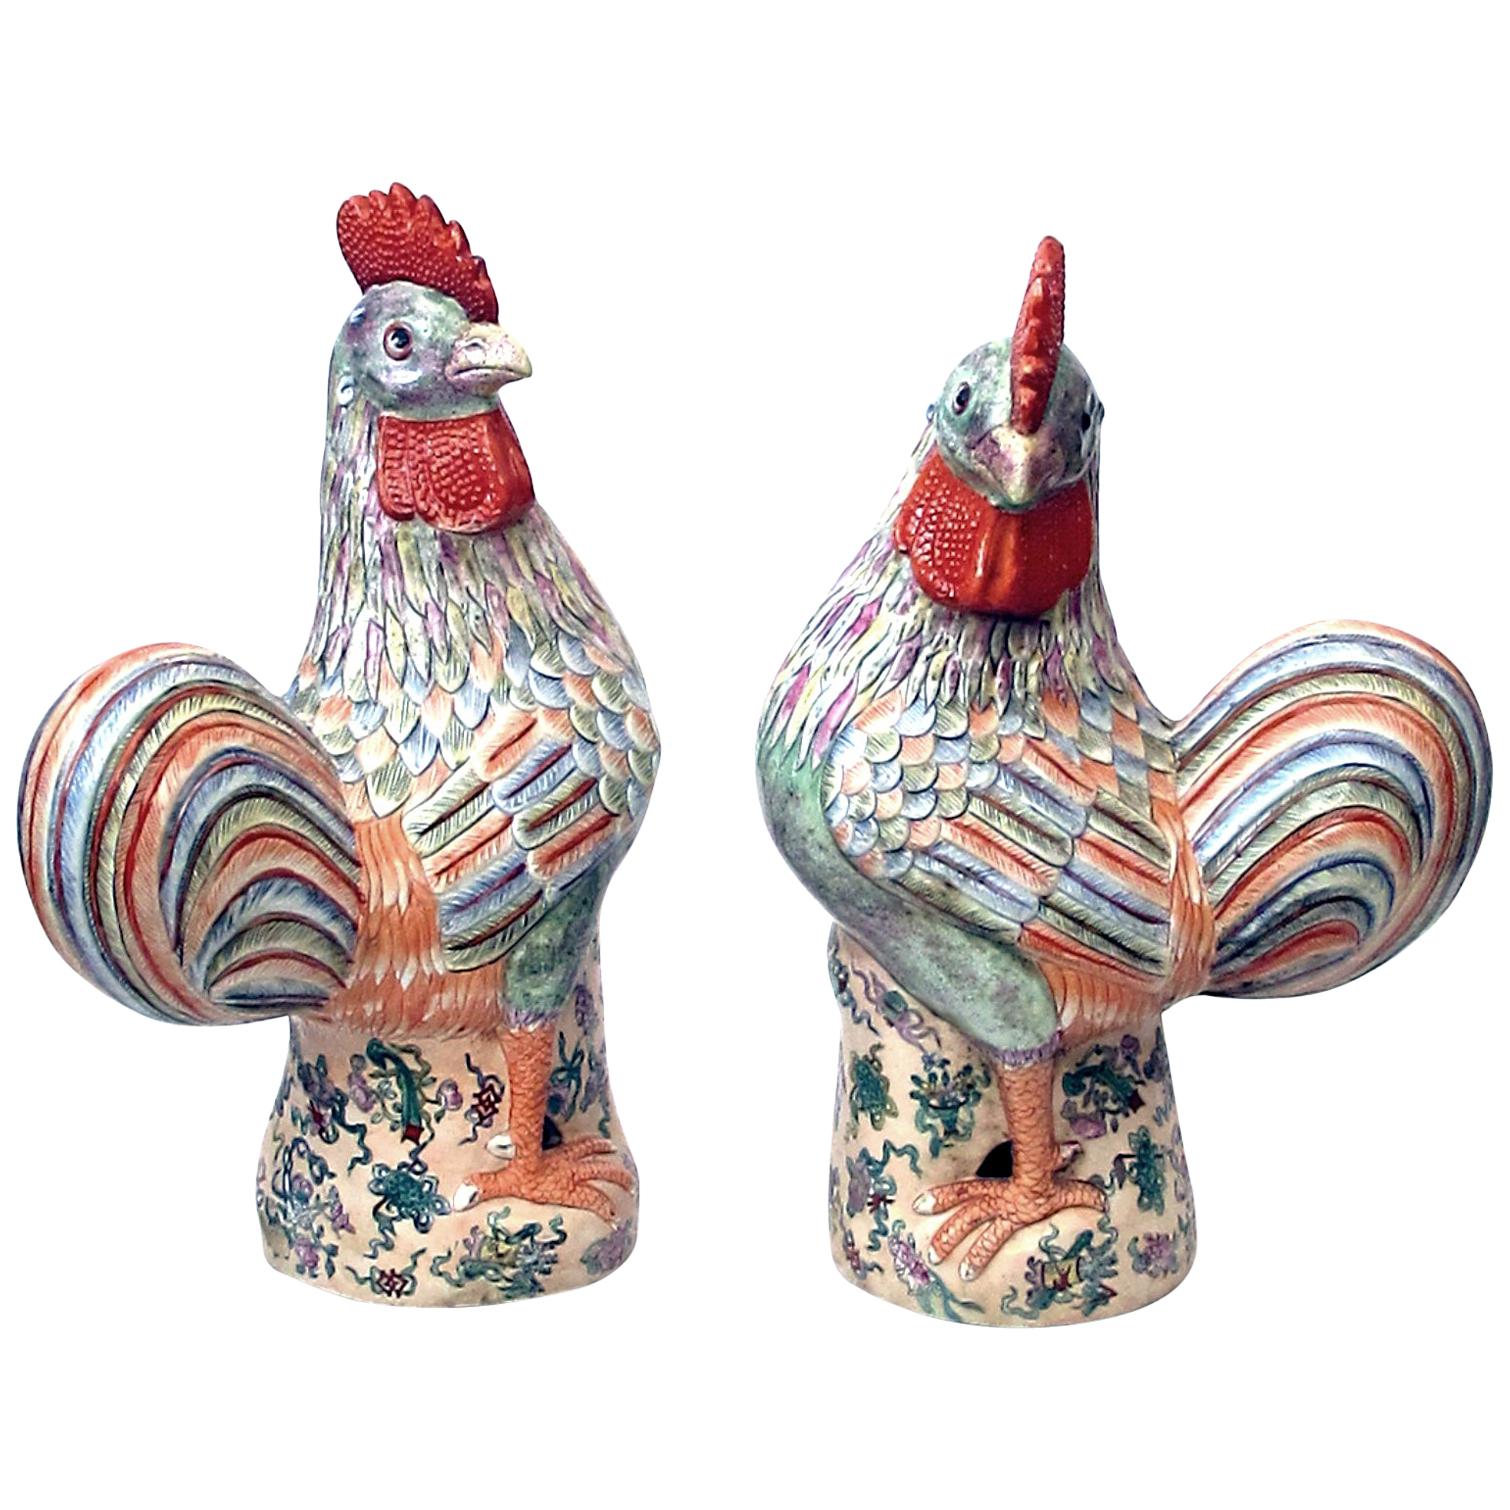 Large Pair of Early 20th Century Chinese Export Polychrome Porcelain Roosters